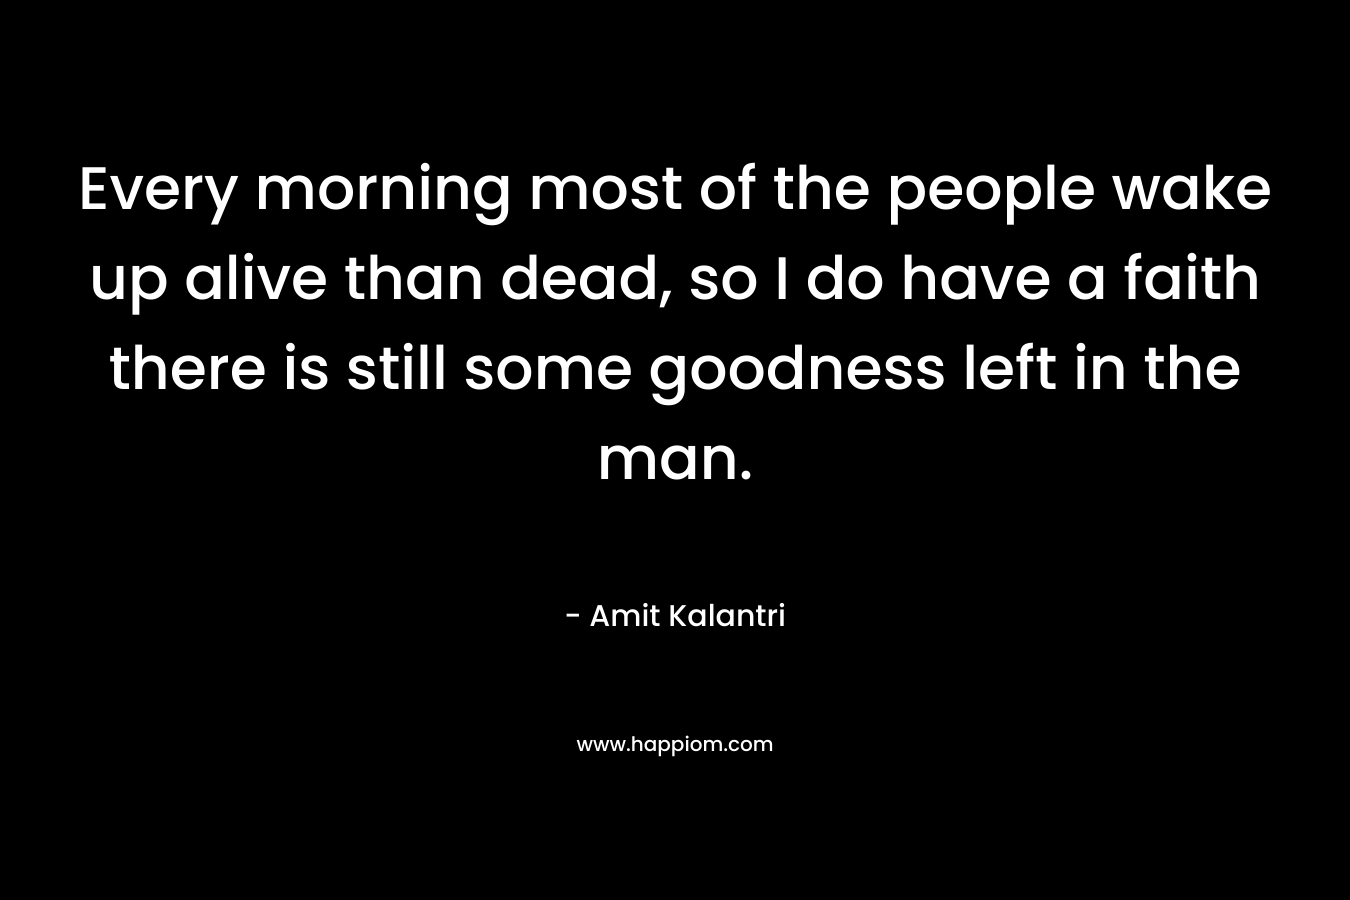 Every morning most of the people wake up alive than dead, so I do have a faith there is still some goodness left in the man.